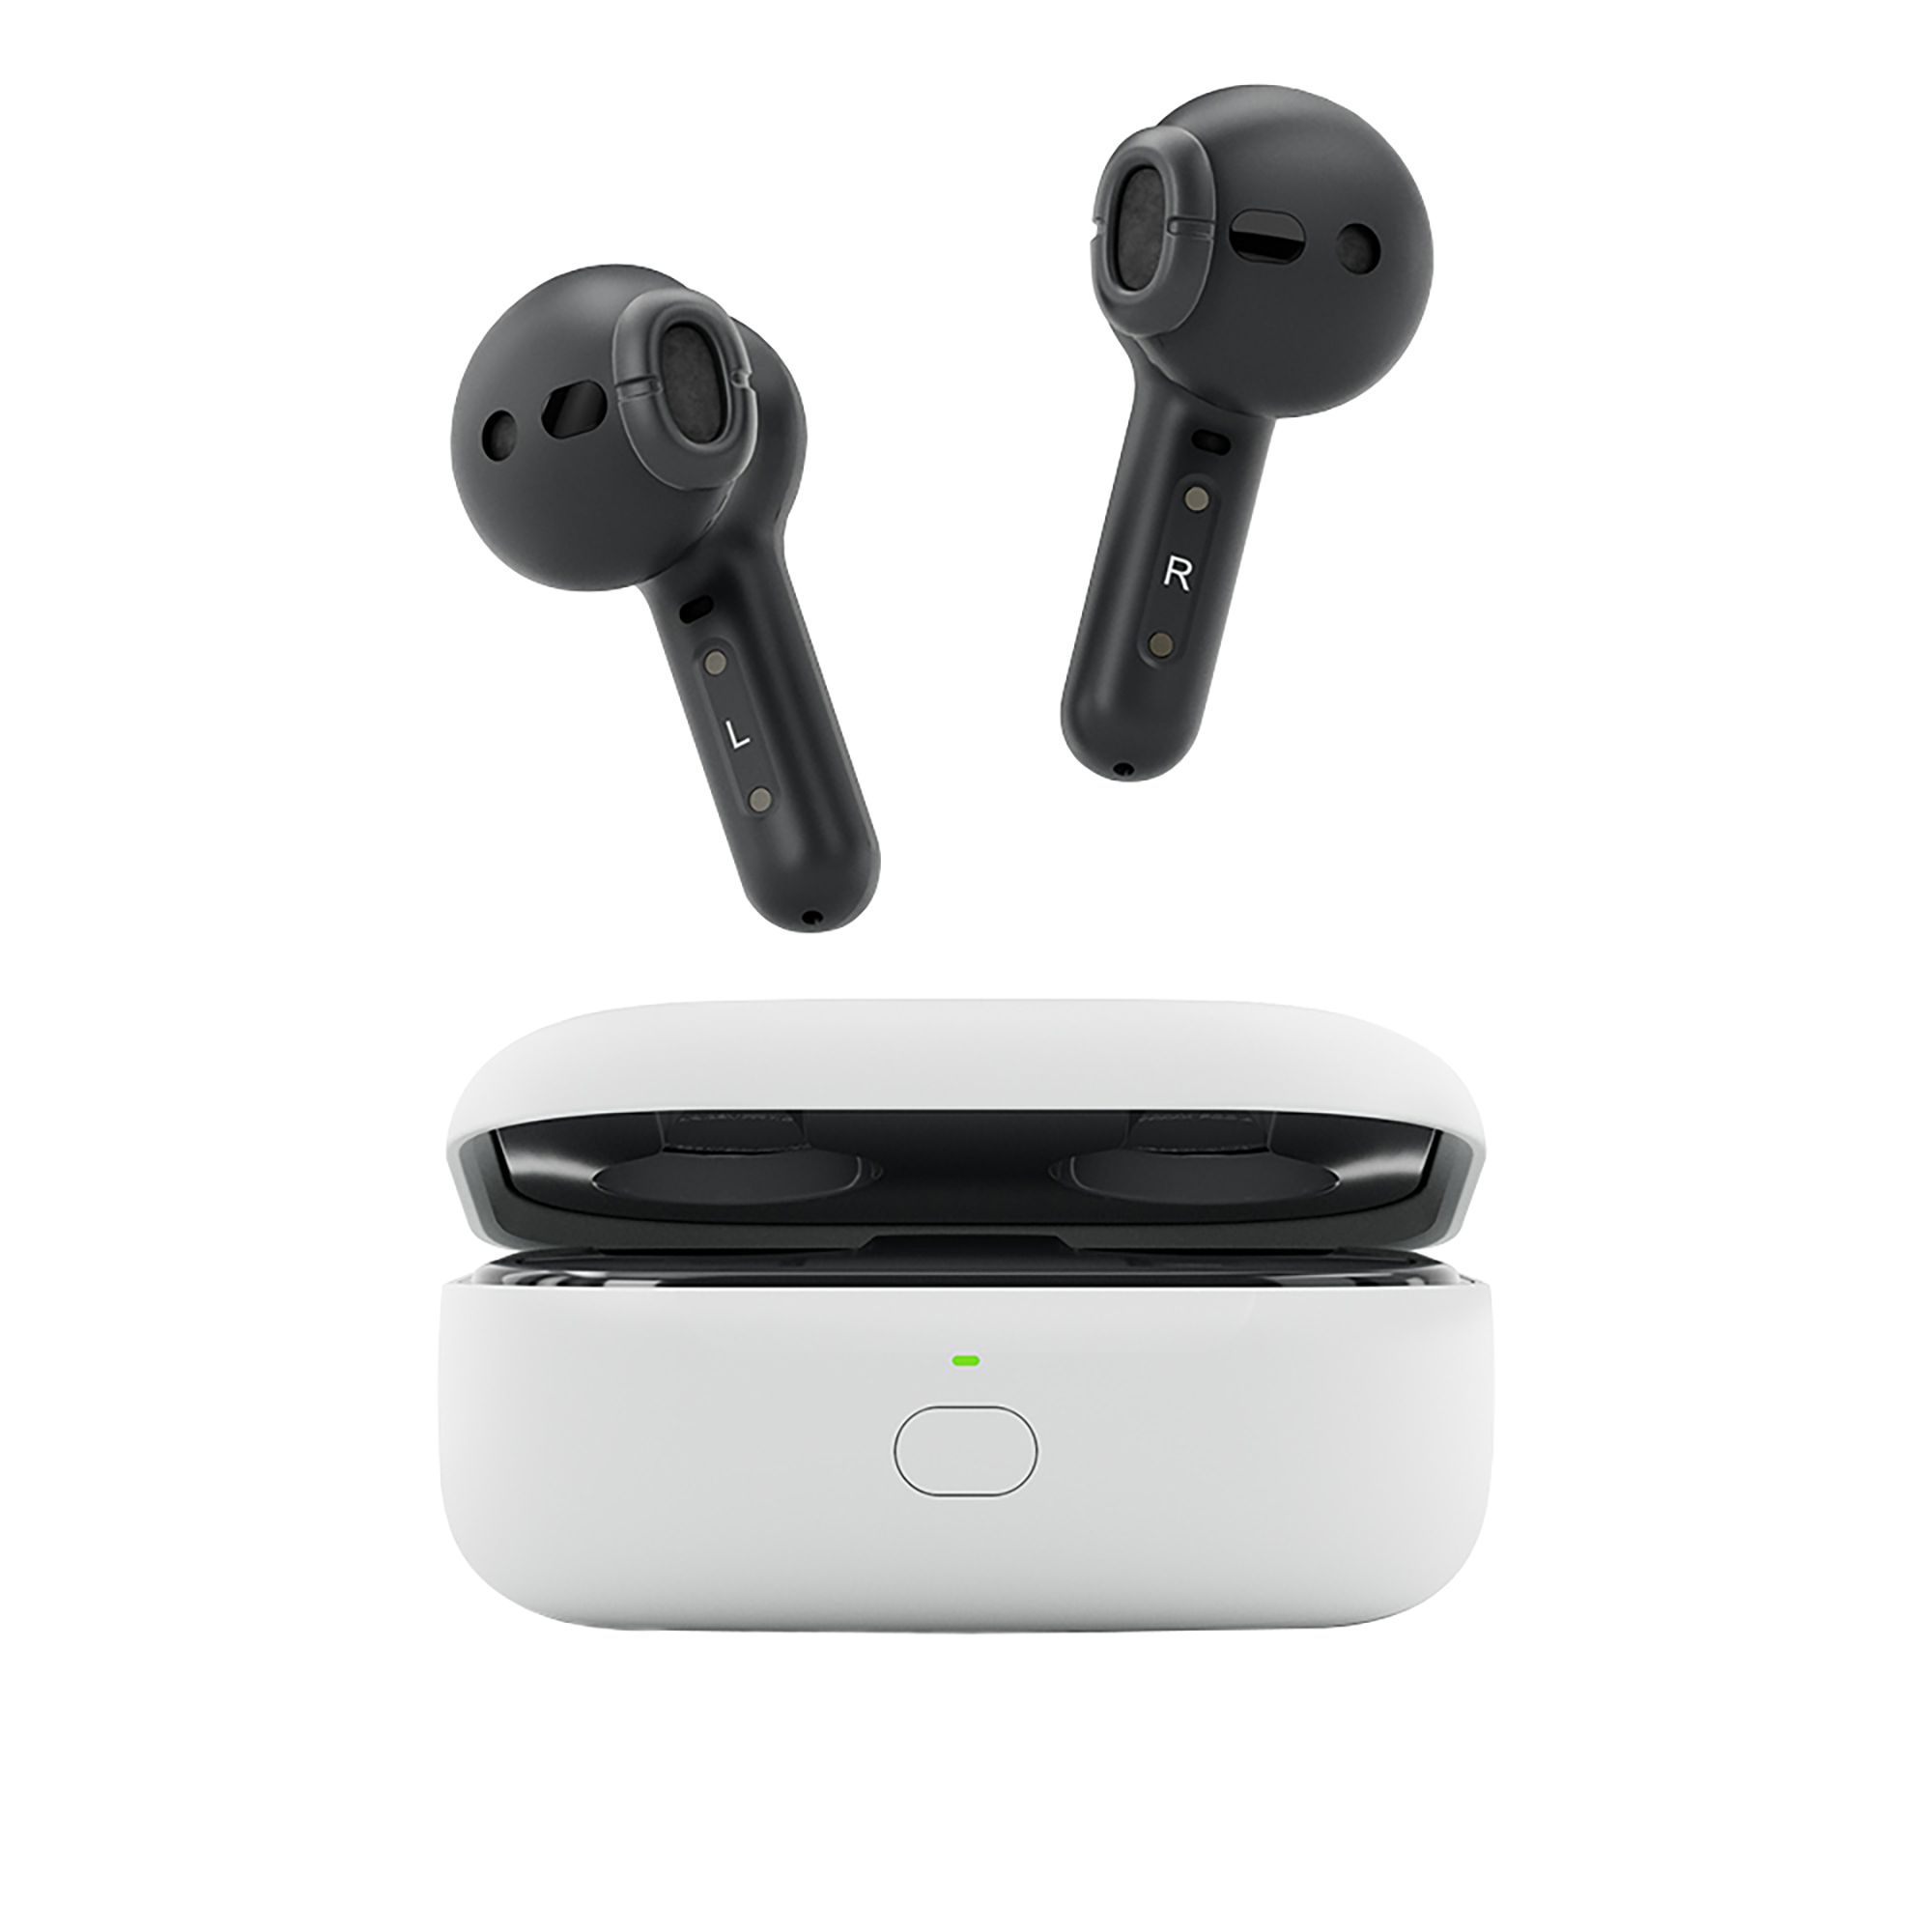 Echo Buds Wireless Earbuds with Active Noise Reduction